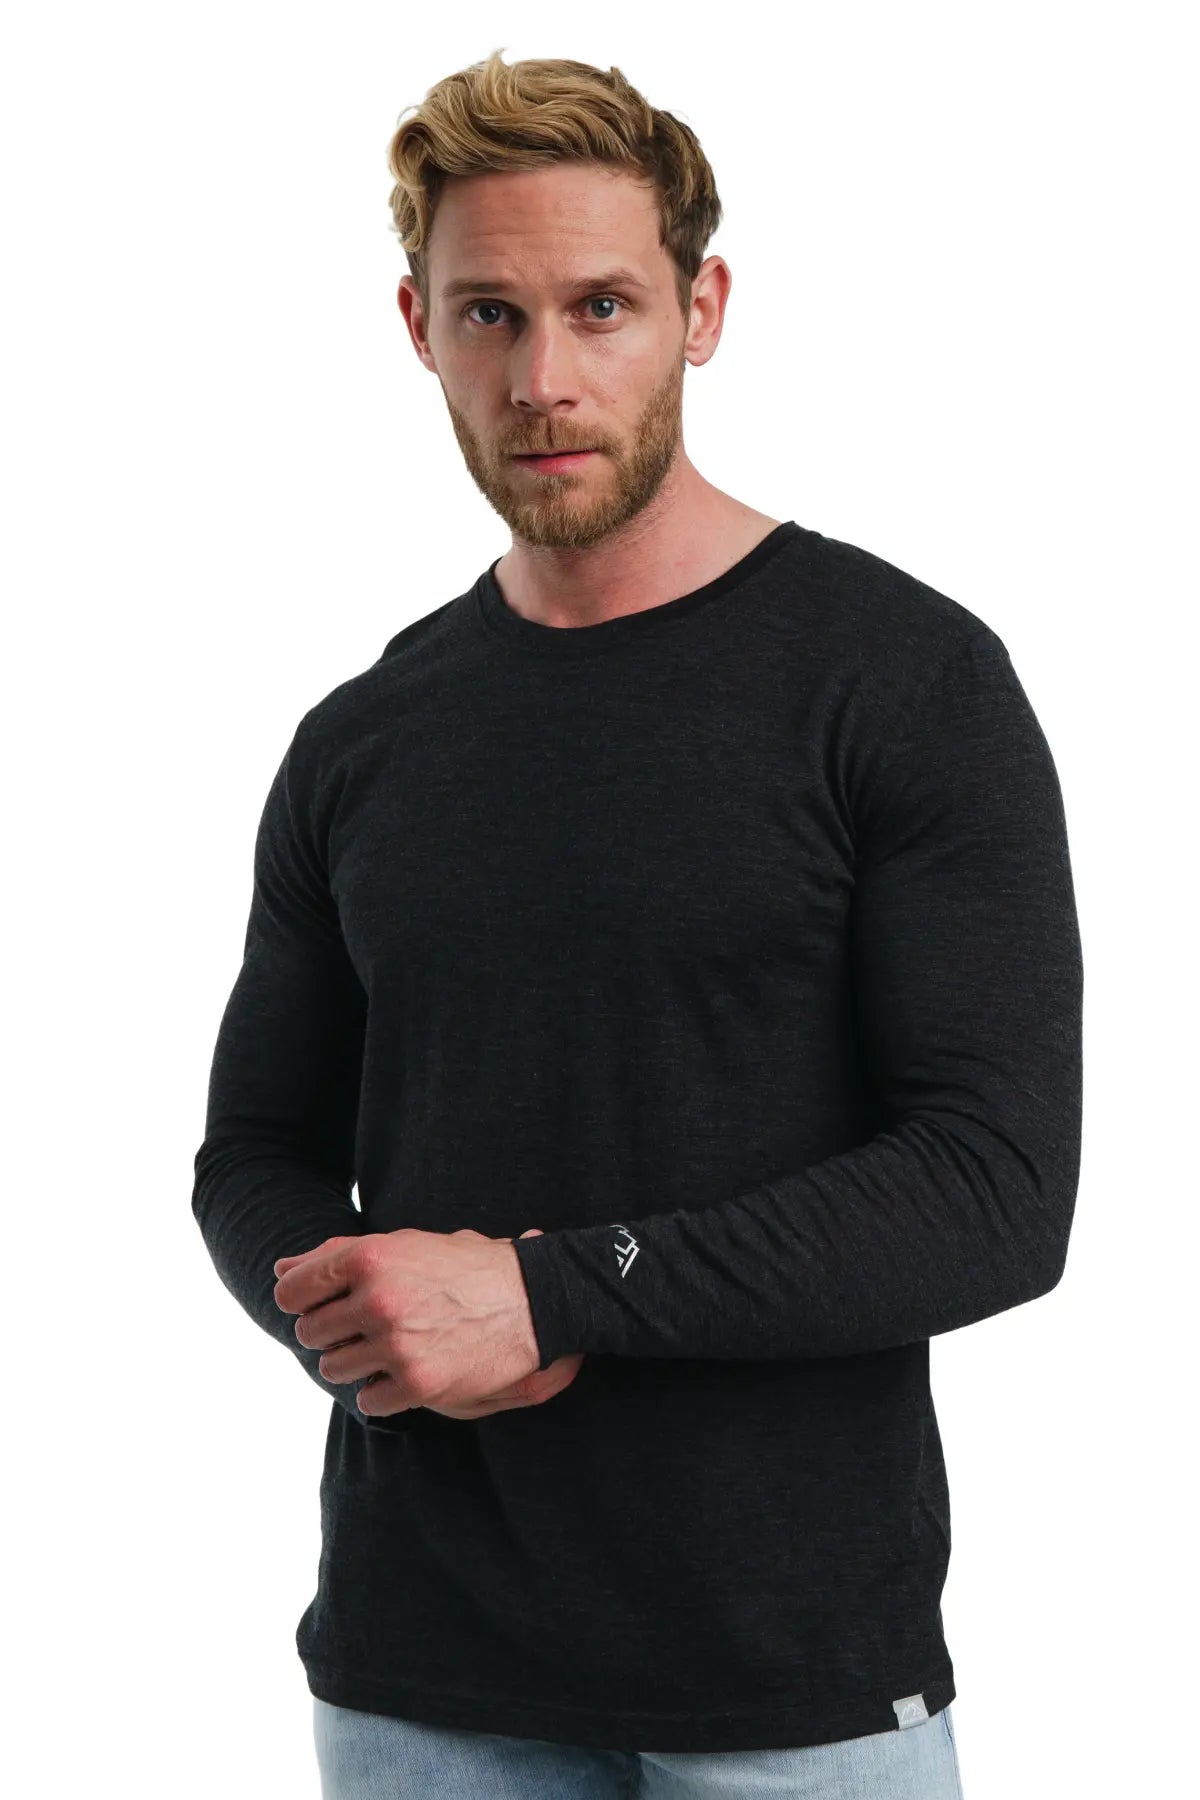 Explore Our Comprehensive Collection of Men's Long Sleeve Shirts ...